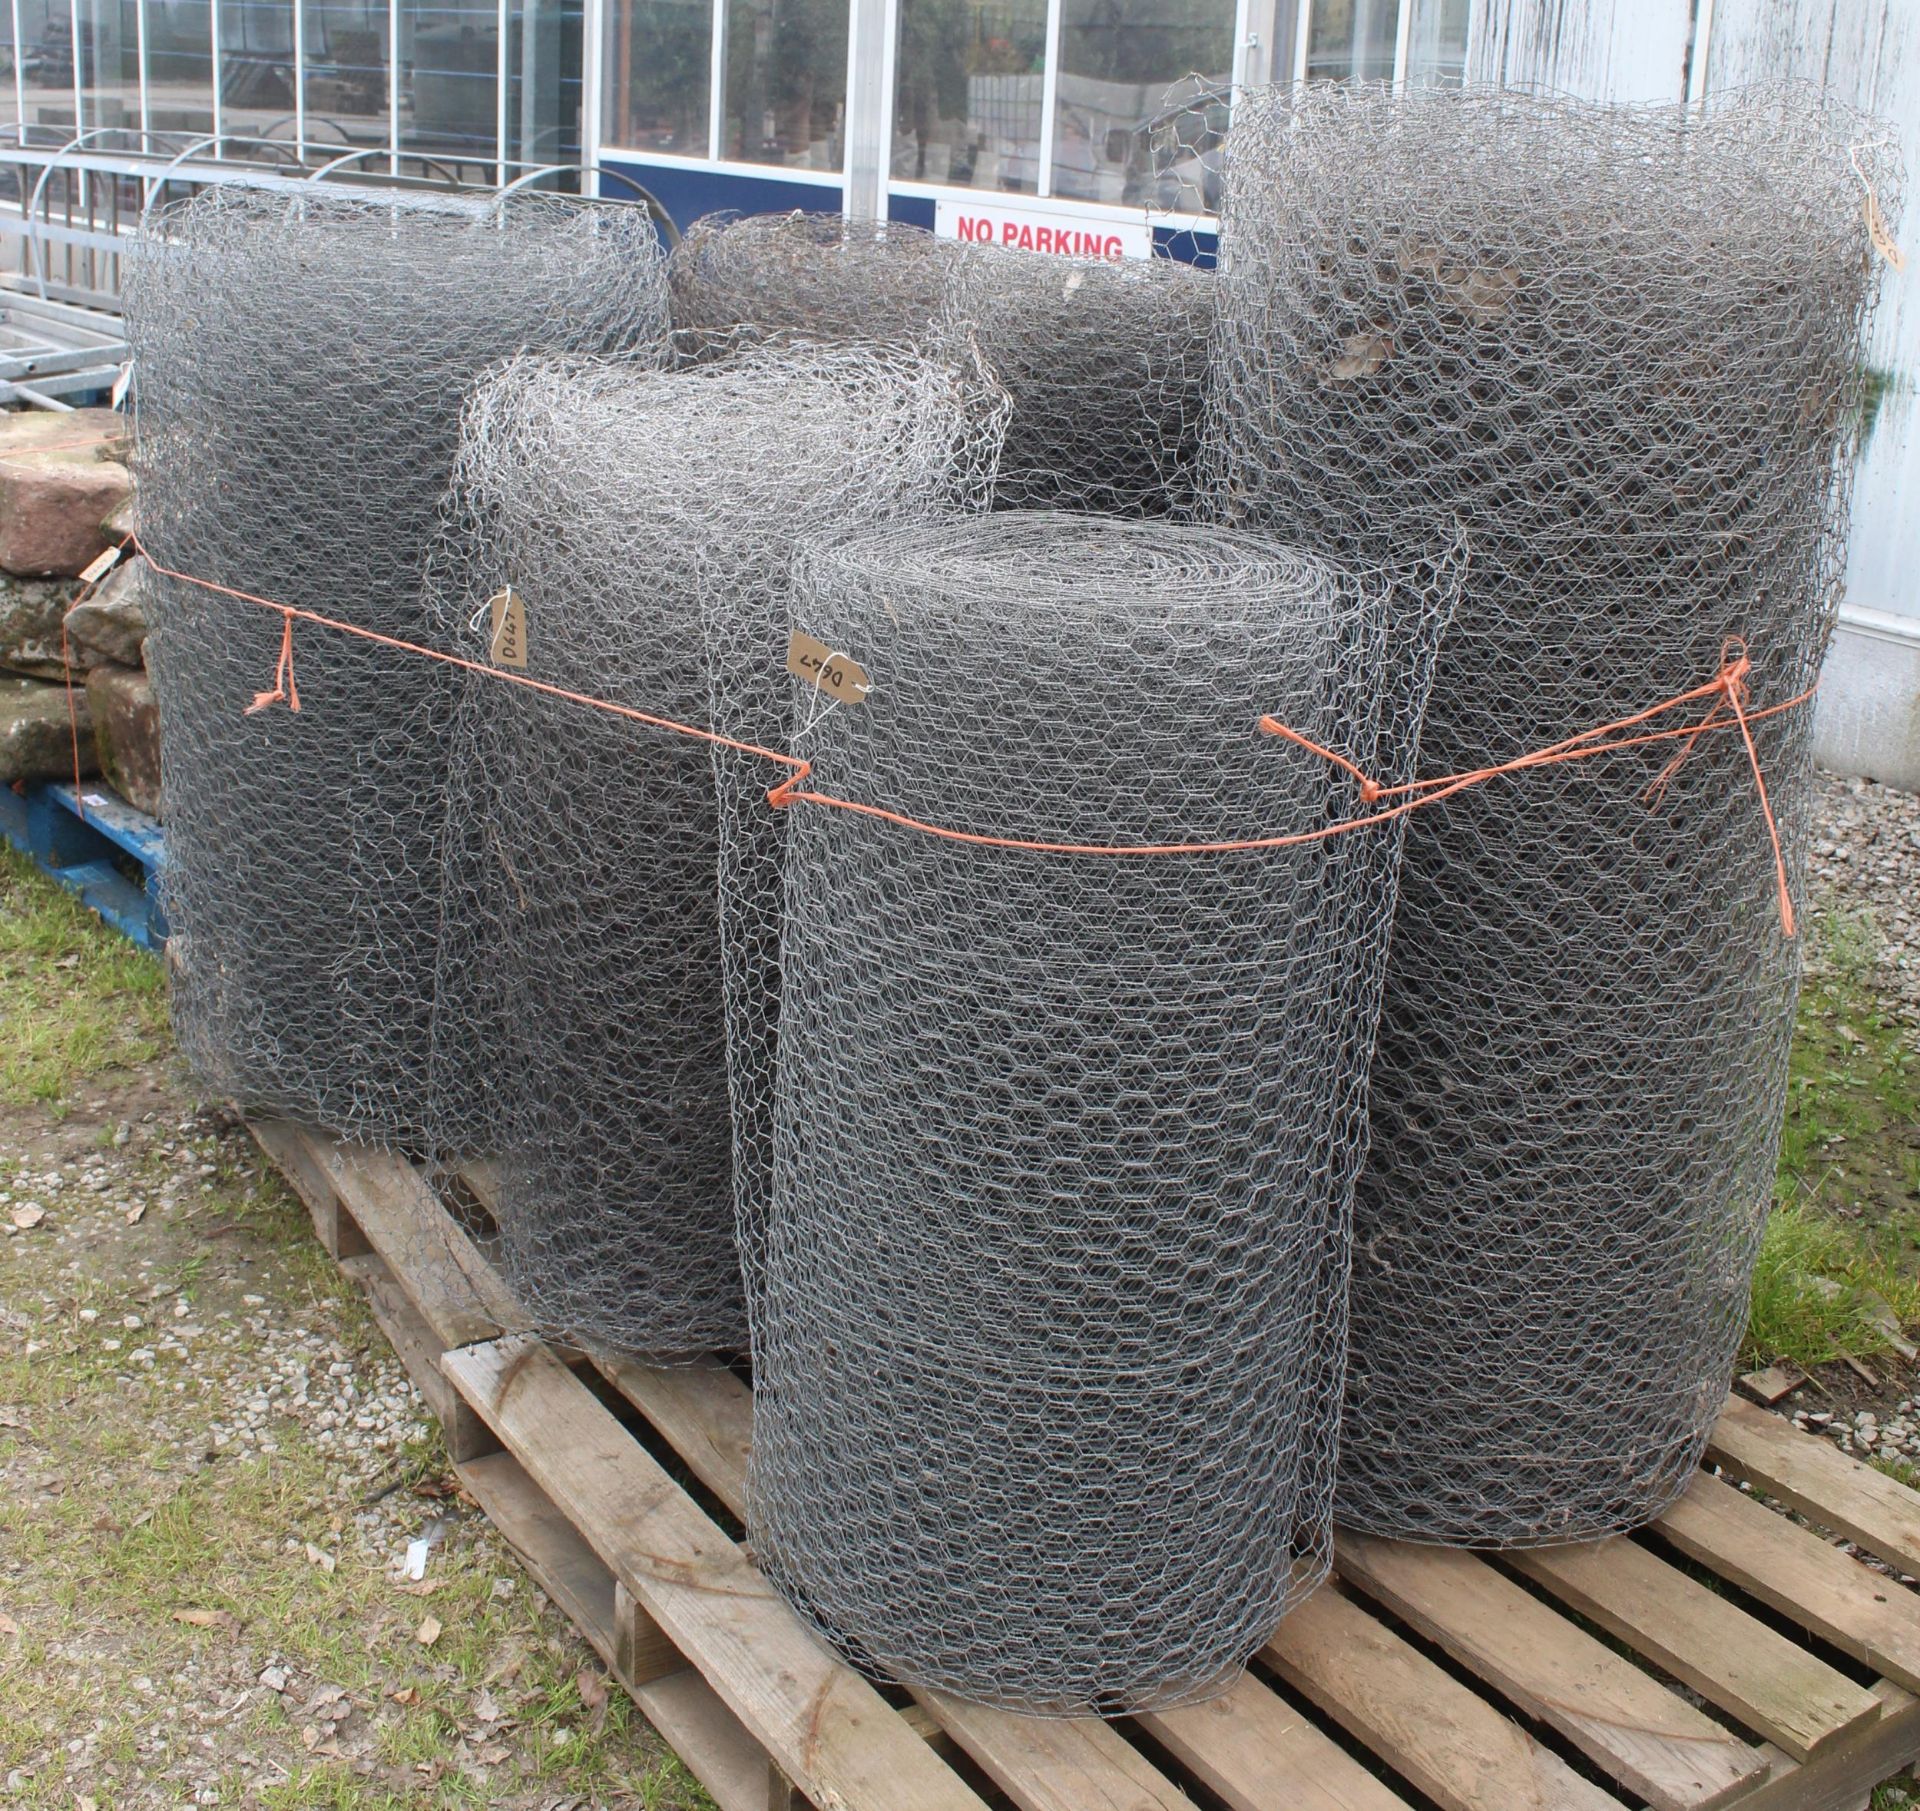 4 ROLLS OF WIRE NETTING 30" HIGH X 4" MESH AND 1 ROLL 36" HIGH X 4" MESH NO VAT - Image 2 of 2